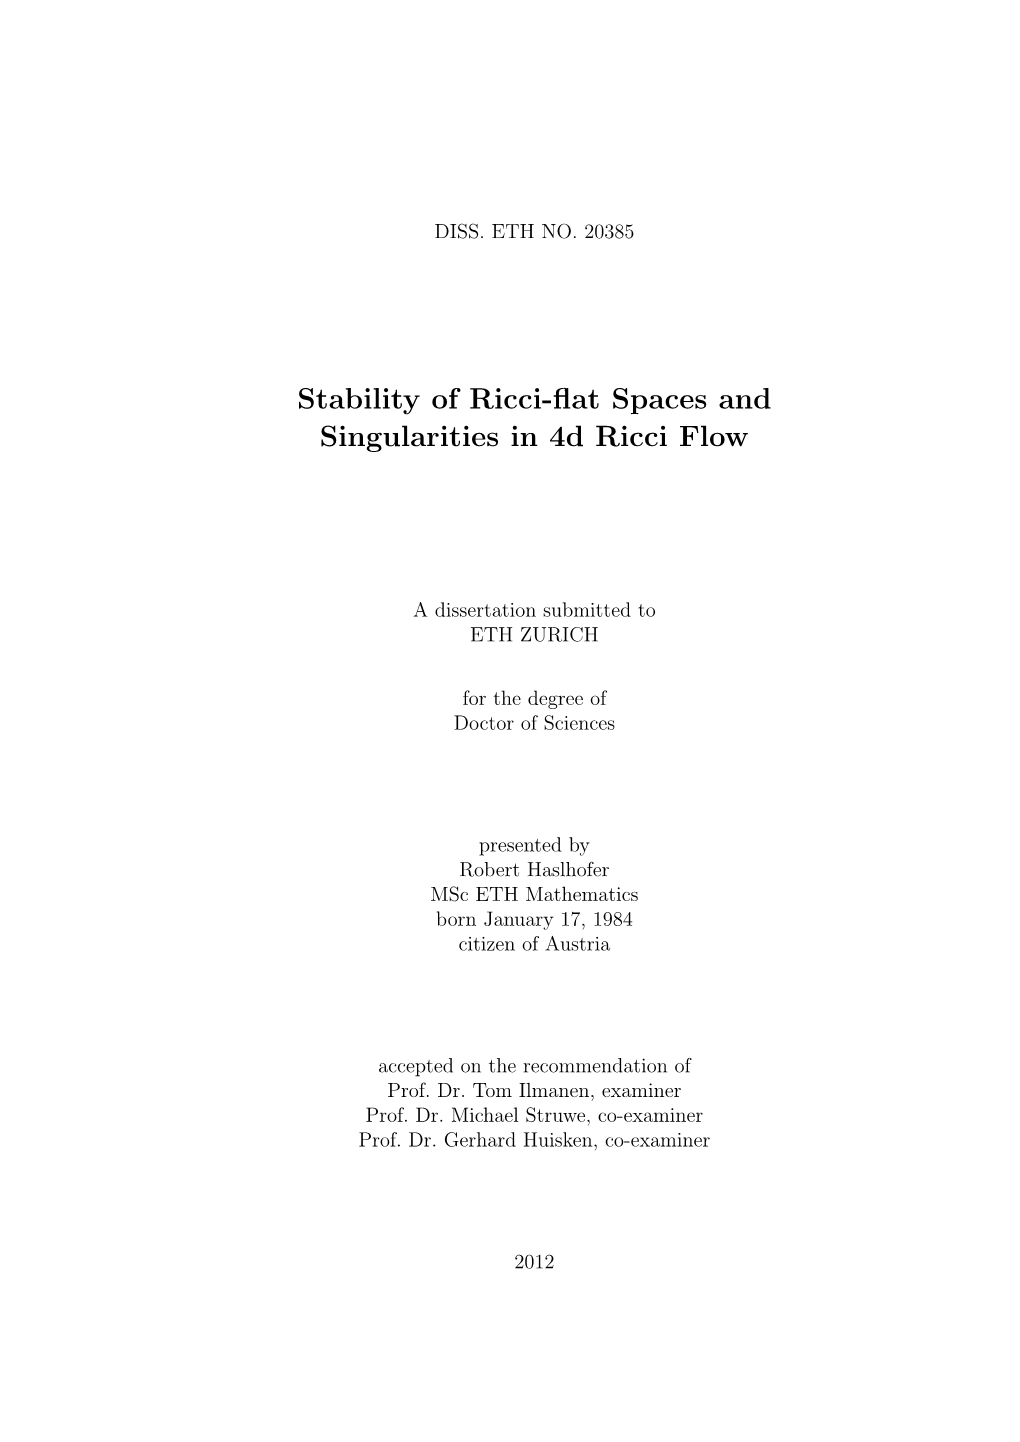 Stability of Ricci-Flat Spaces and Singularities in 4D Ricci Flow